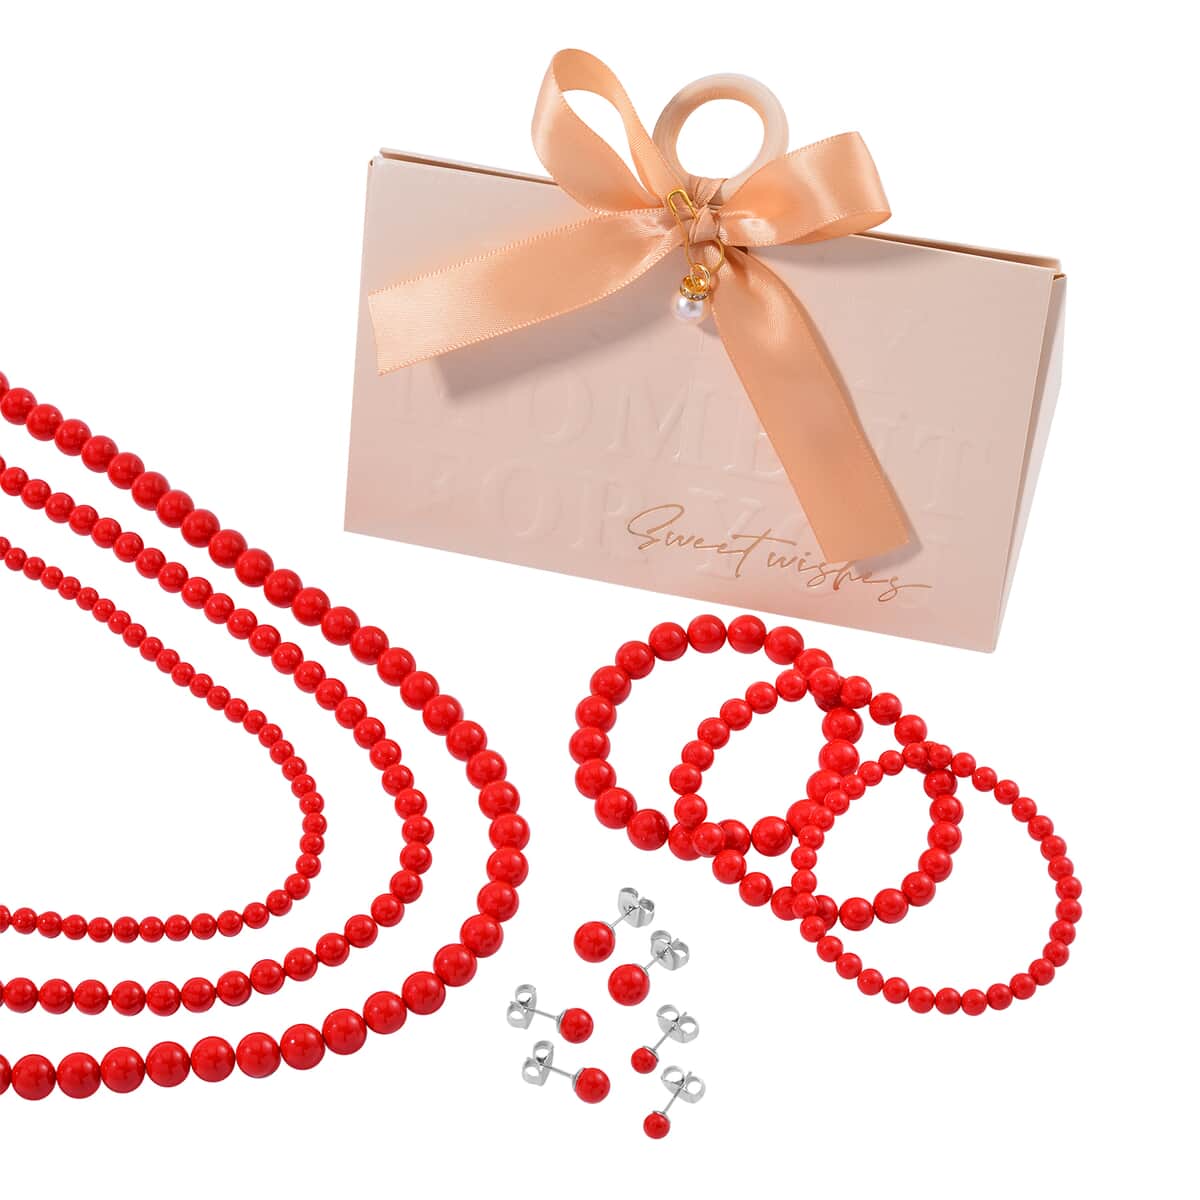 Set with Bow Ribbon Ivory Packaging 9pcs Set Red Color Constituted Shell Pearl Stretch Bracelet, Earrings and Necklace 20-22 Inches in Stainless Steel image number 0